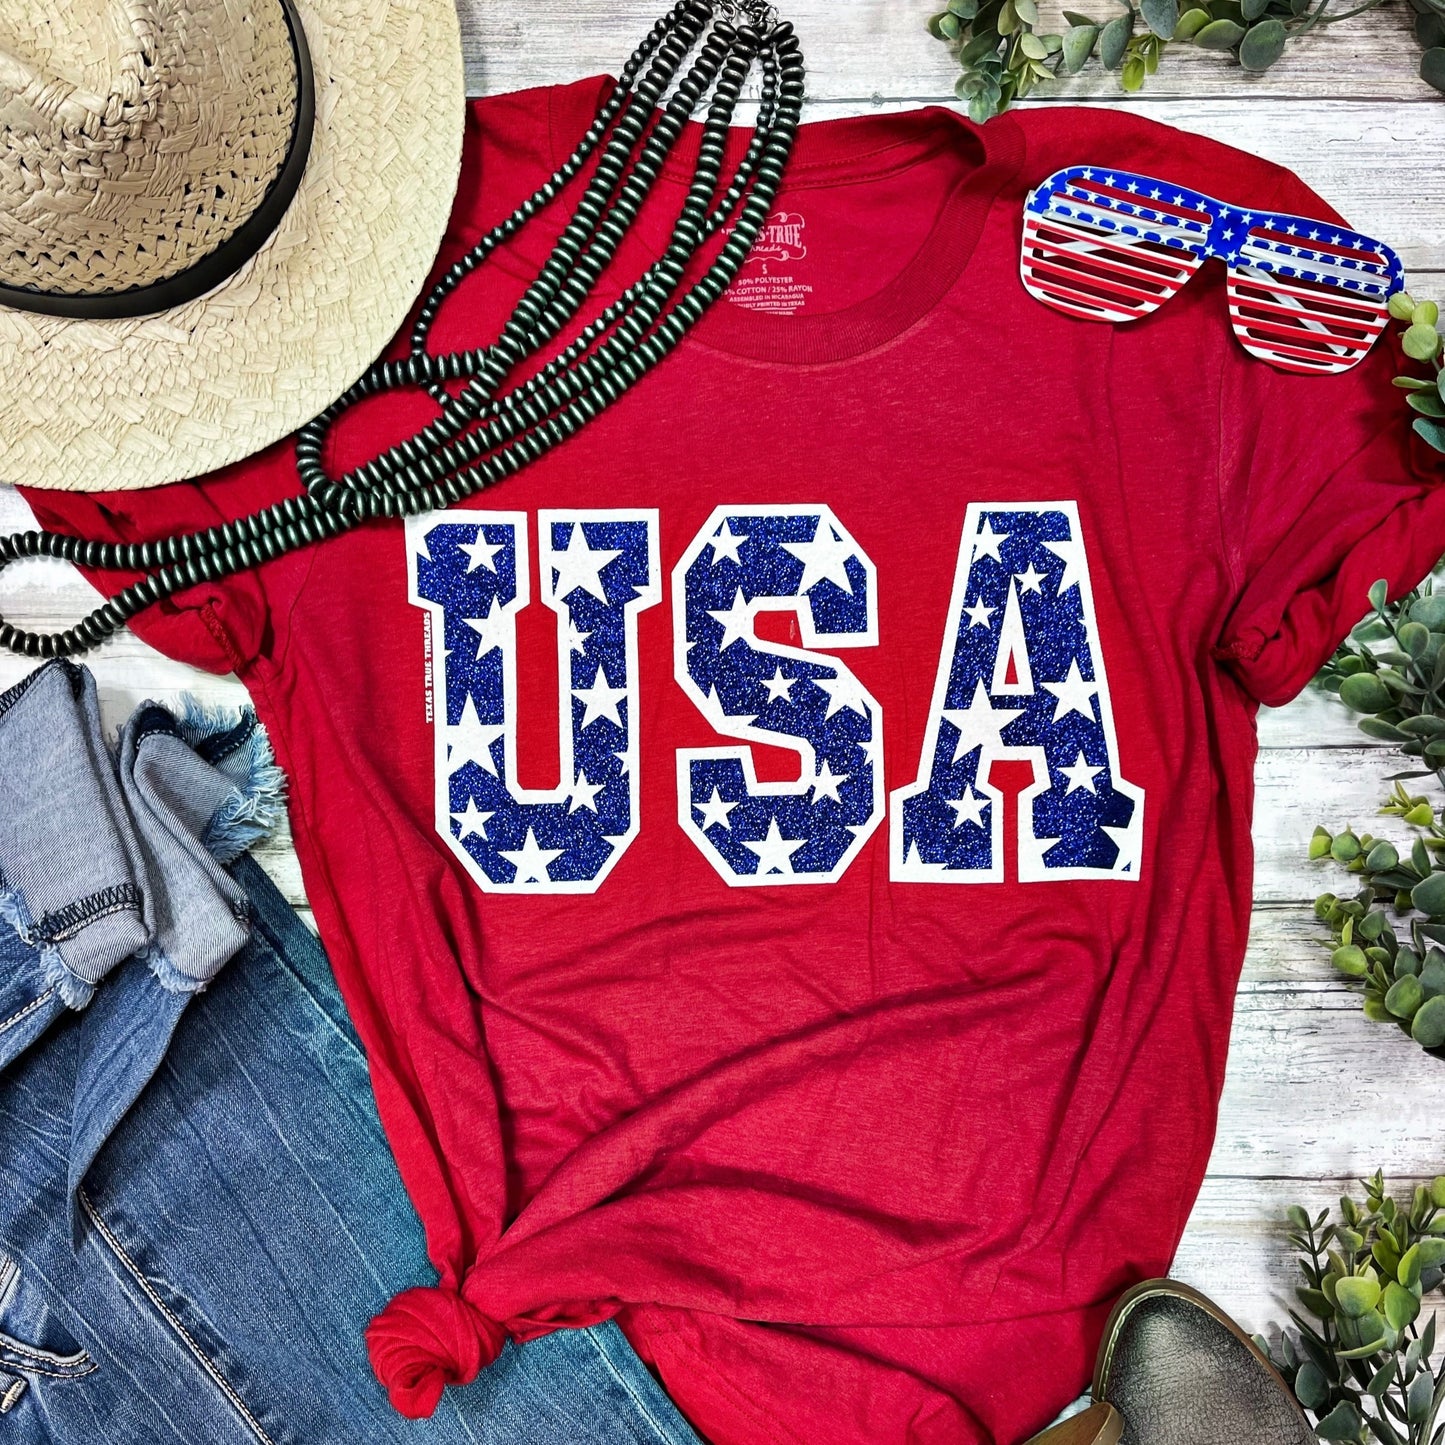 USA Tee & Tank with Stars in Blue Glitter